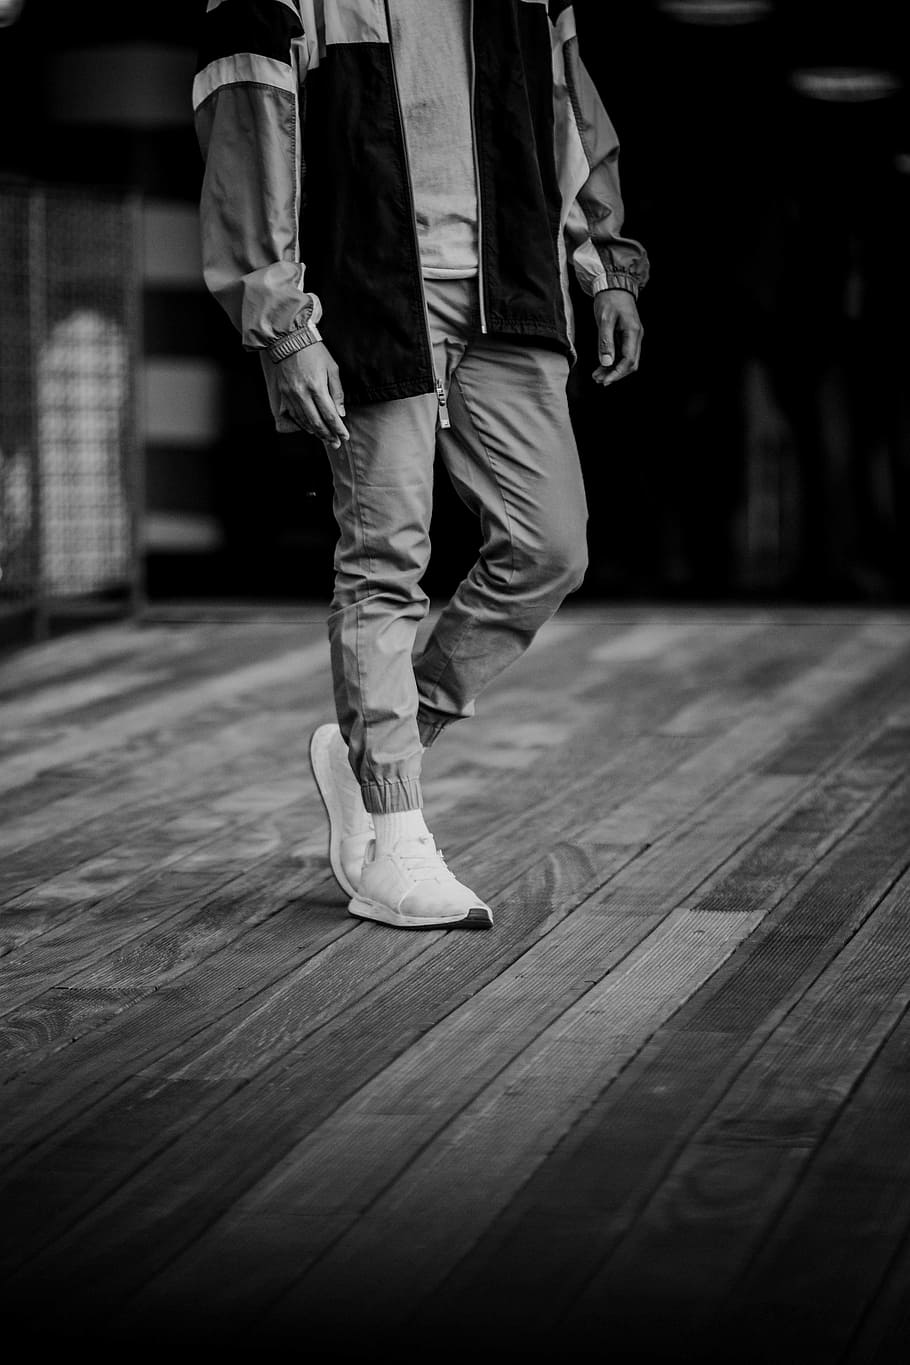 grayscale photography of person standing on plank floor, black and white